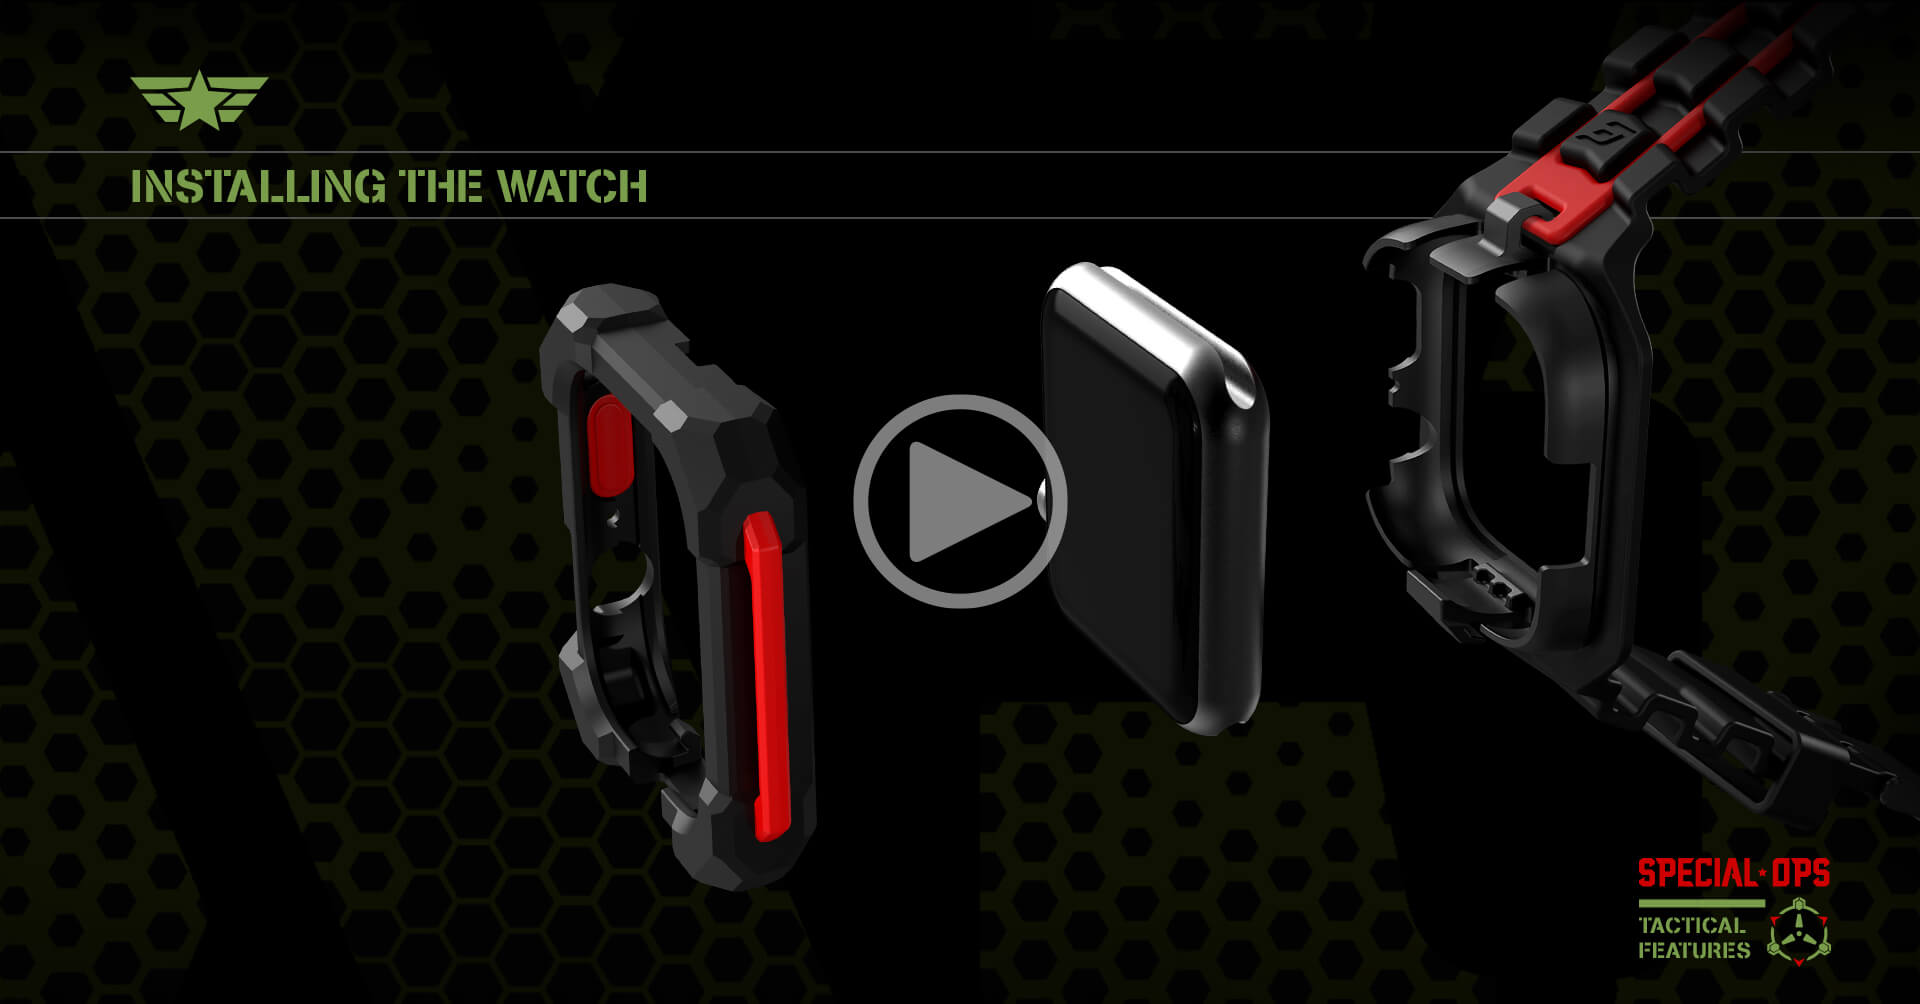 Installing the Series 7 Apple Watch in Special OPS Watch Band